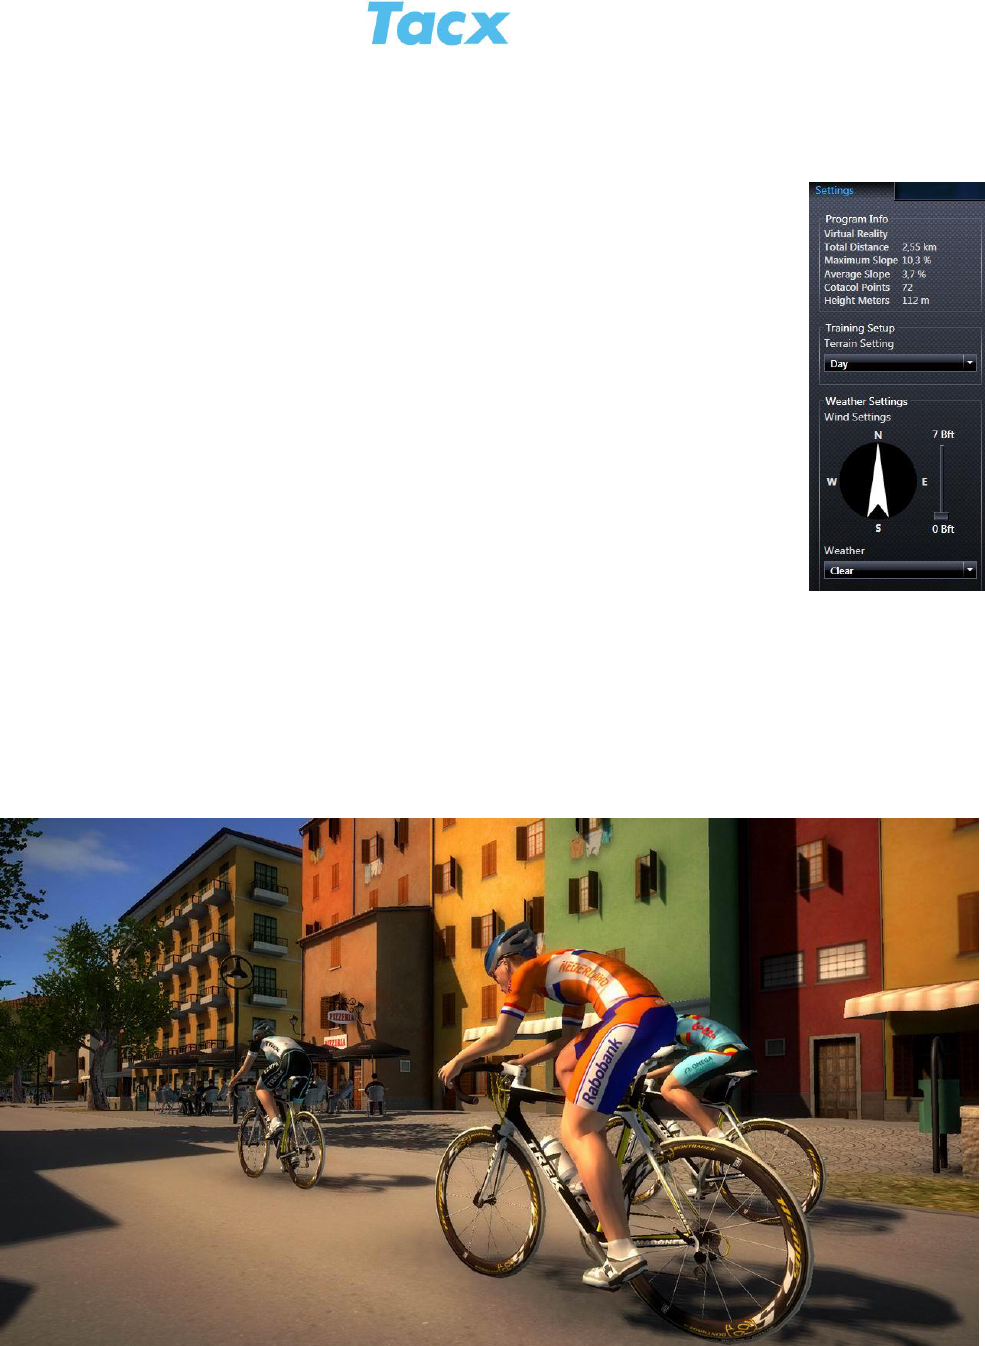 scheepsbouw versieren geur Manual Tacx Tacx Trainer software 4 Virtual Reality (page 3 of 12) (English)